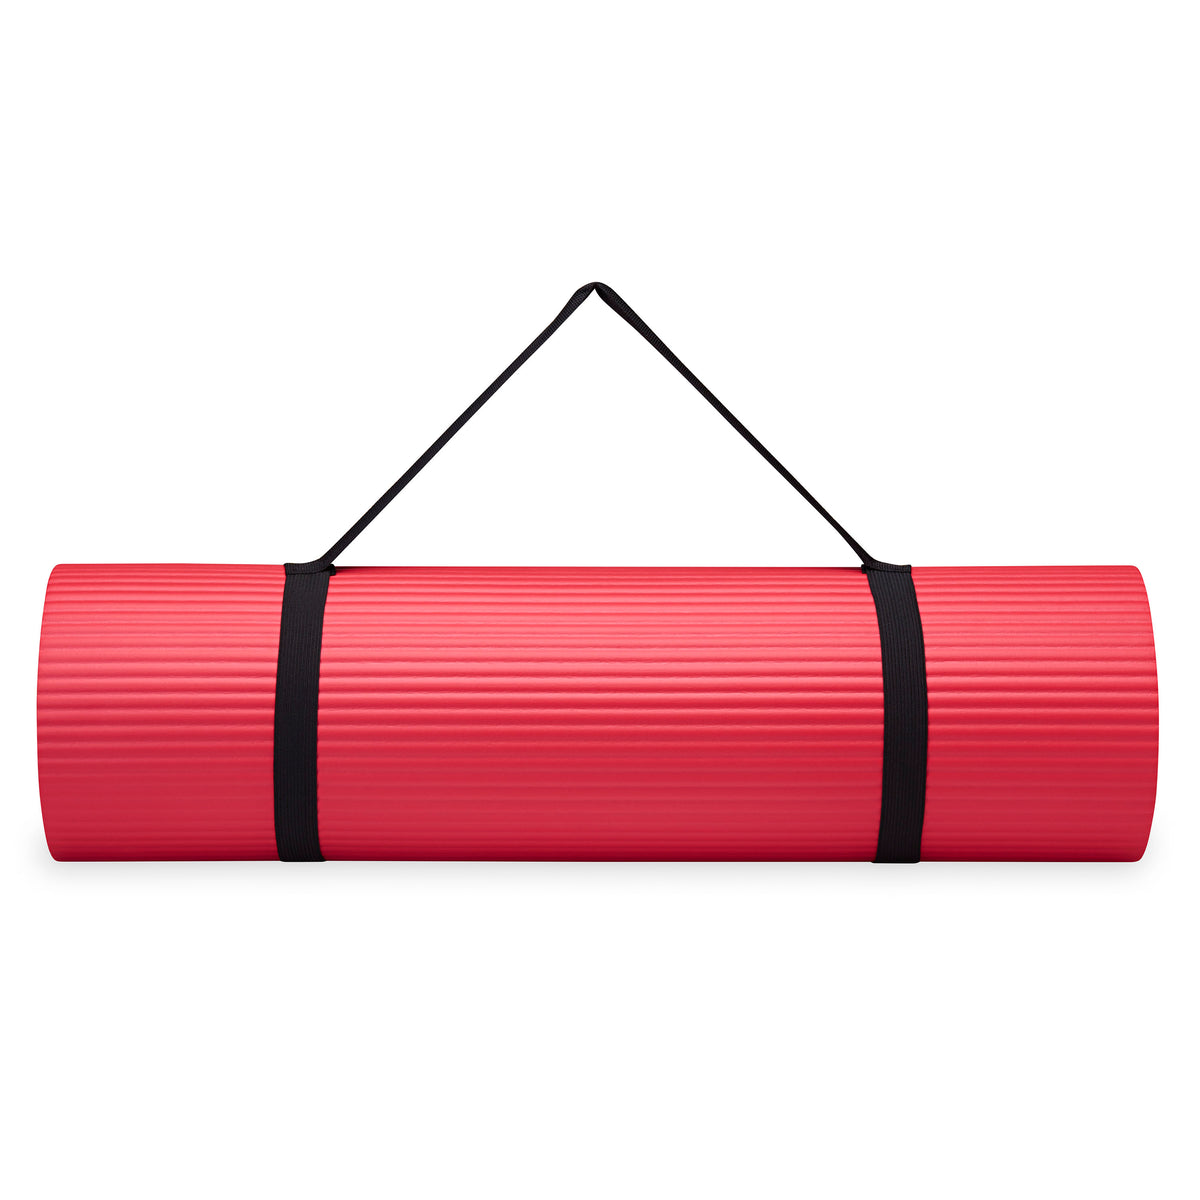 Reebok 10mm Fitness Mat Red rolled up with sling